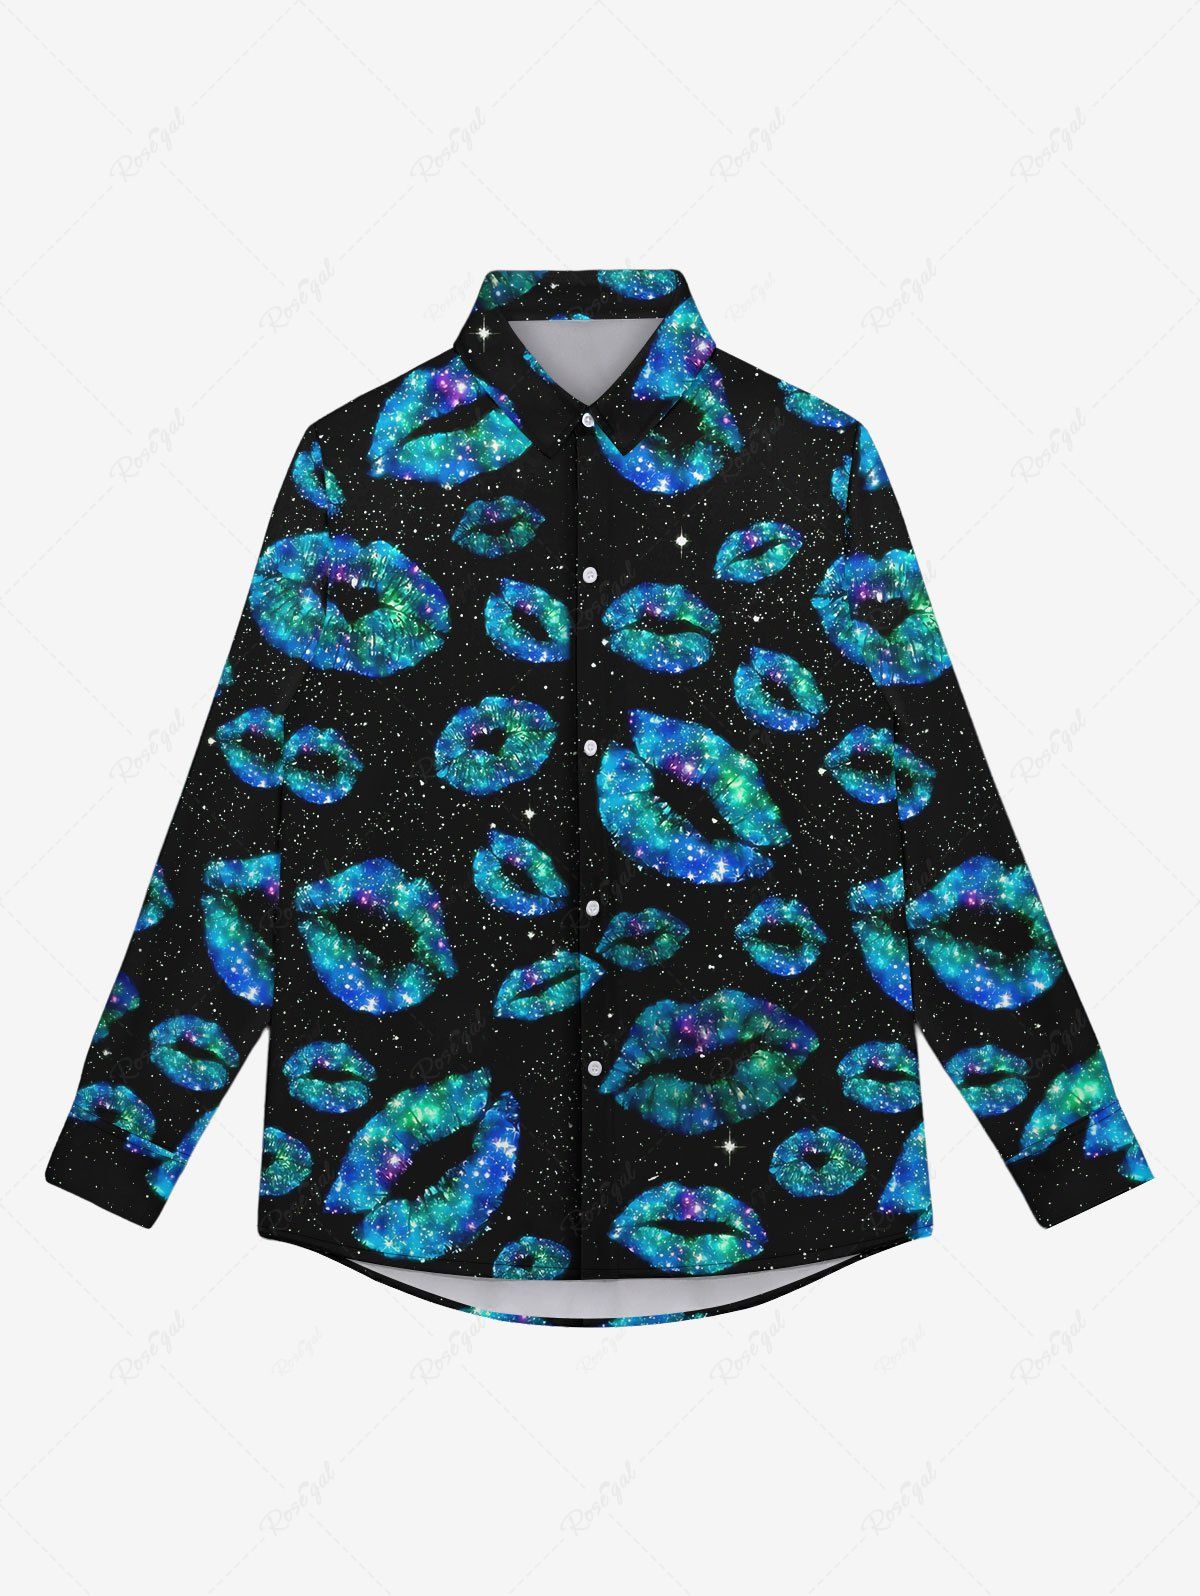 Online Gothic Turn-down Collar Glitter Sparkling Lip Galaxy Printed Buttons Shirt For Men  